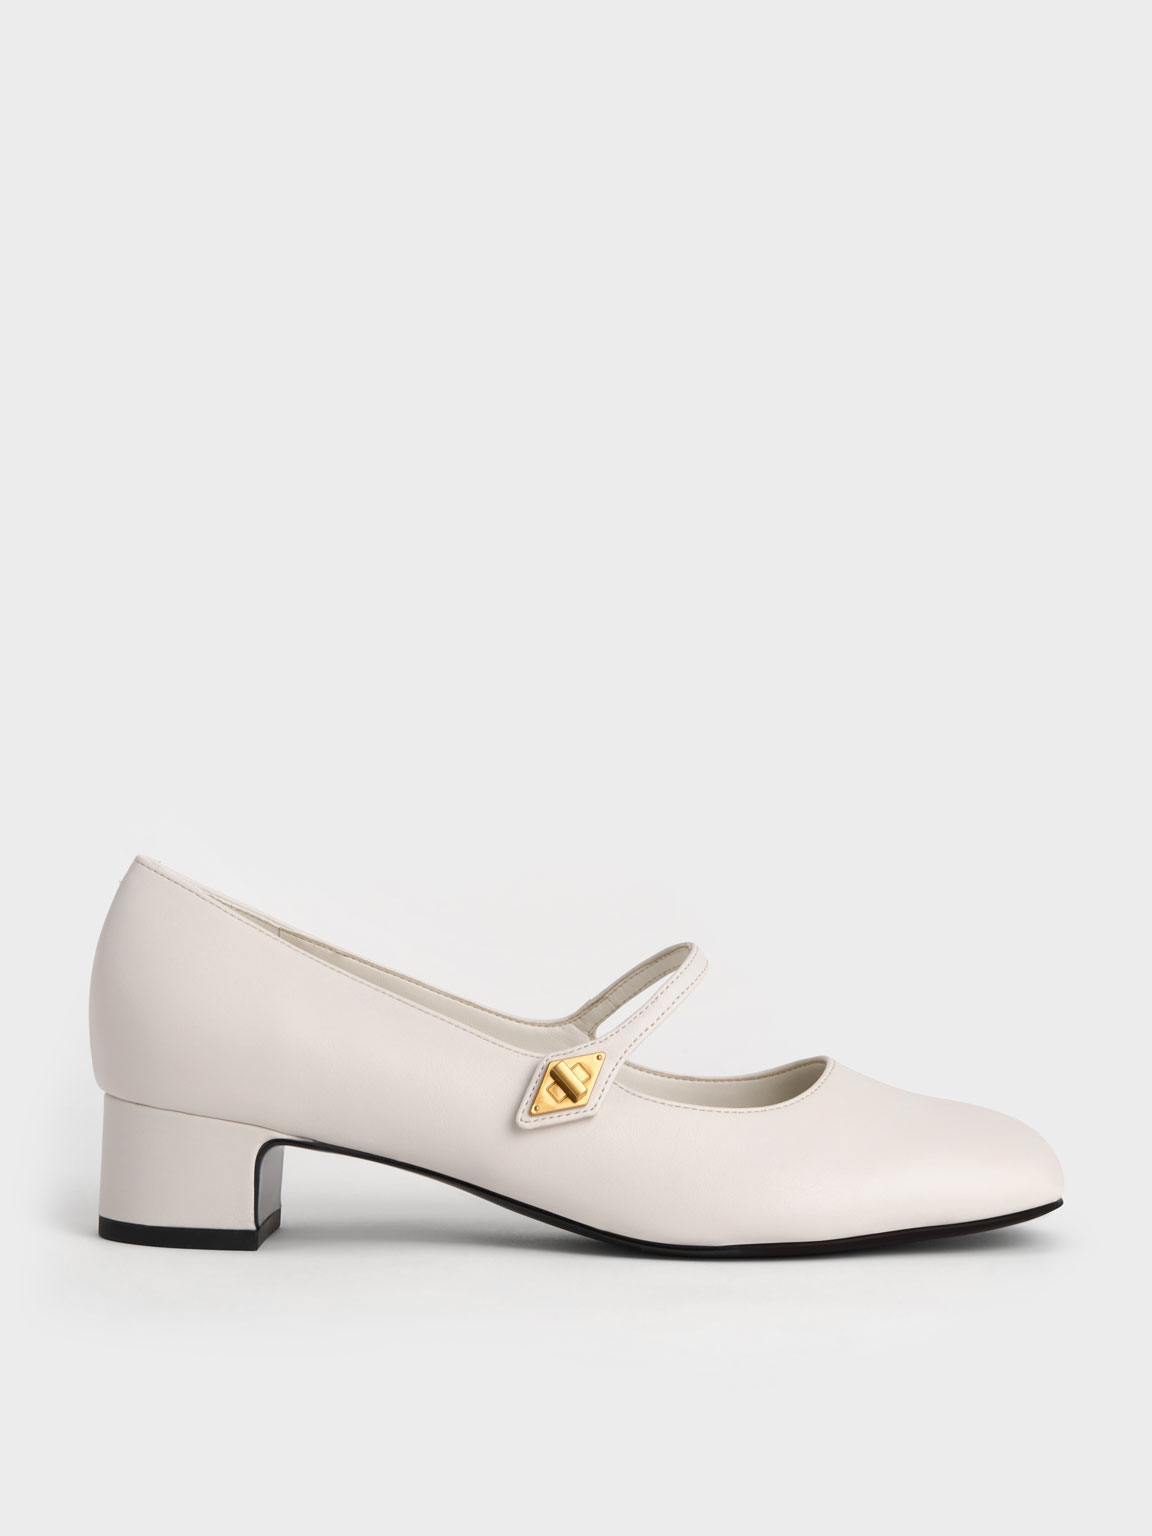 Chalk Metallic Accent Mary Jane Pumps | CHARLES & KEITH UK